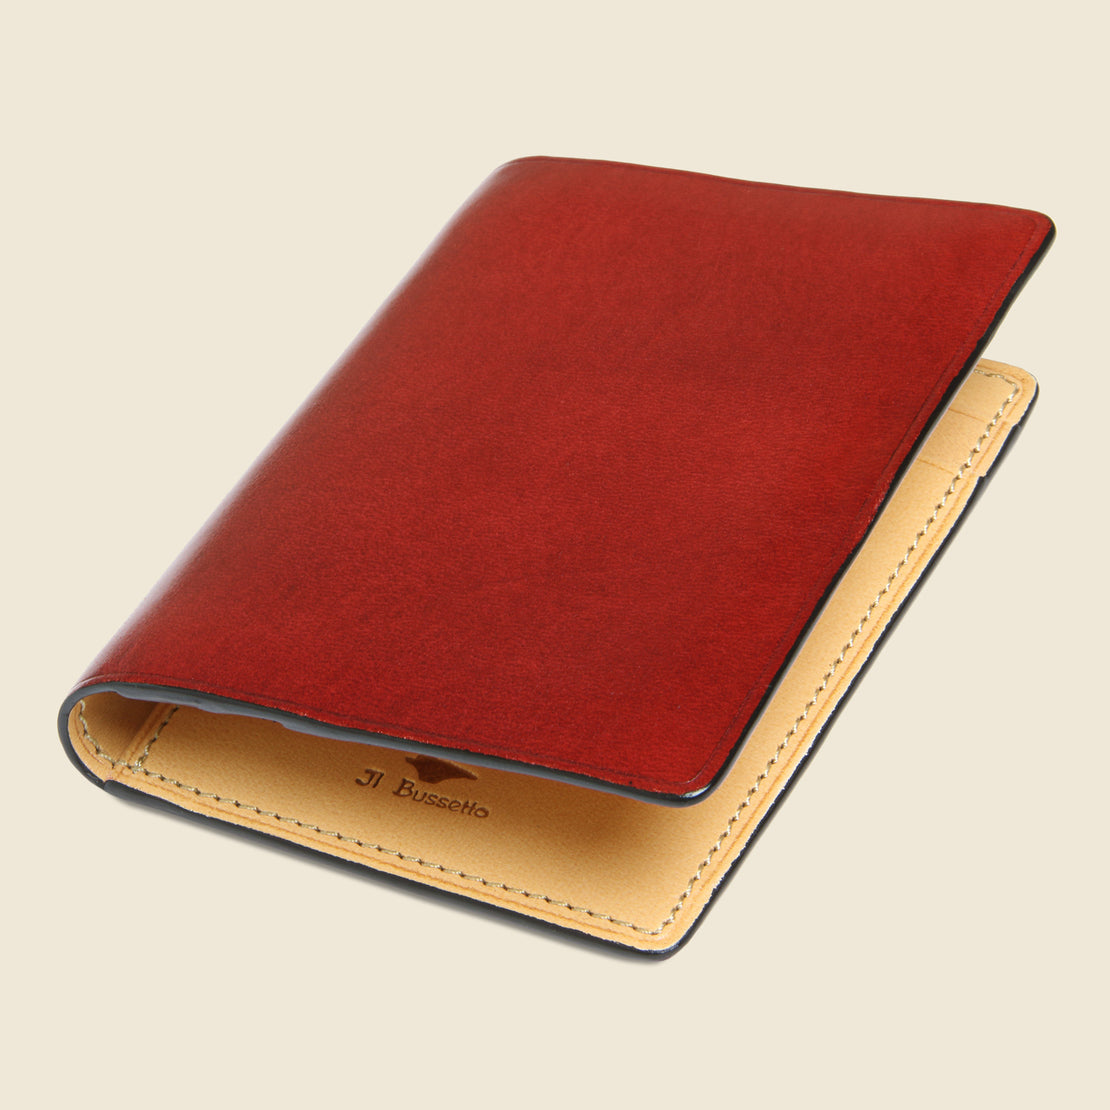 Bi-Fold Card Case - Cherry - Il Bussetto - STAG Provisions - Accessories - Wallets